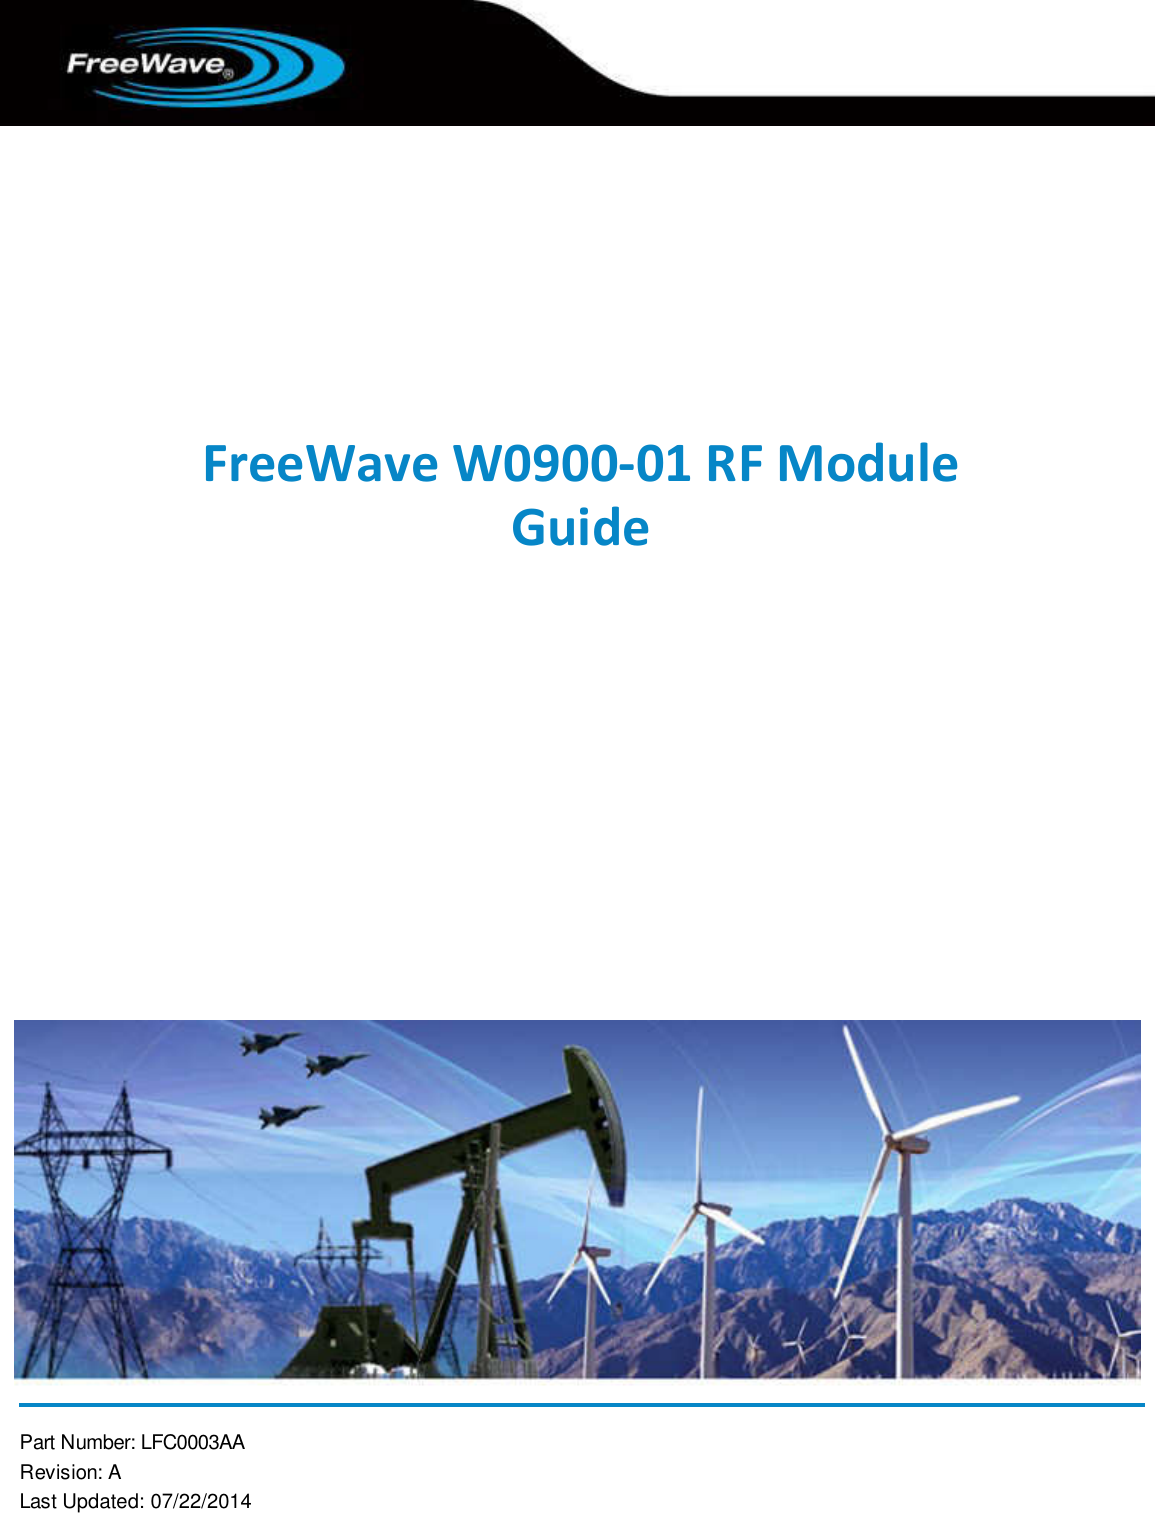  Part Number: LFC0003AA Revision: A Last Updated: 07/22/2014    FreeWave W0900-01 RF Module Guide  